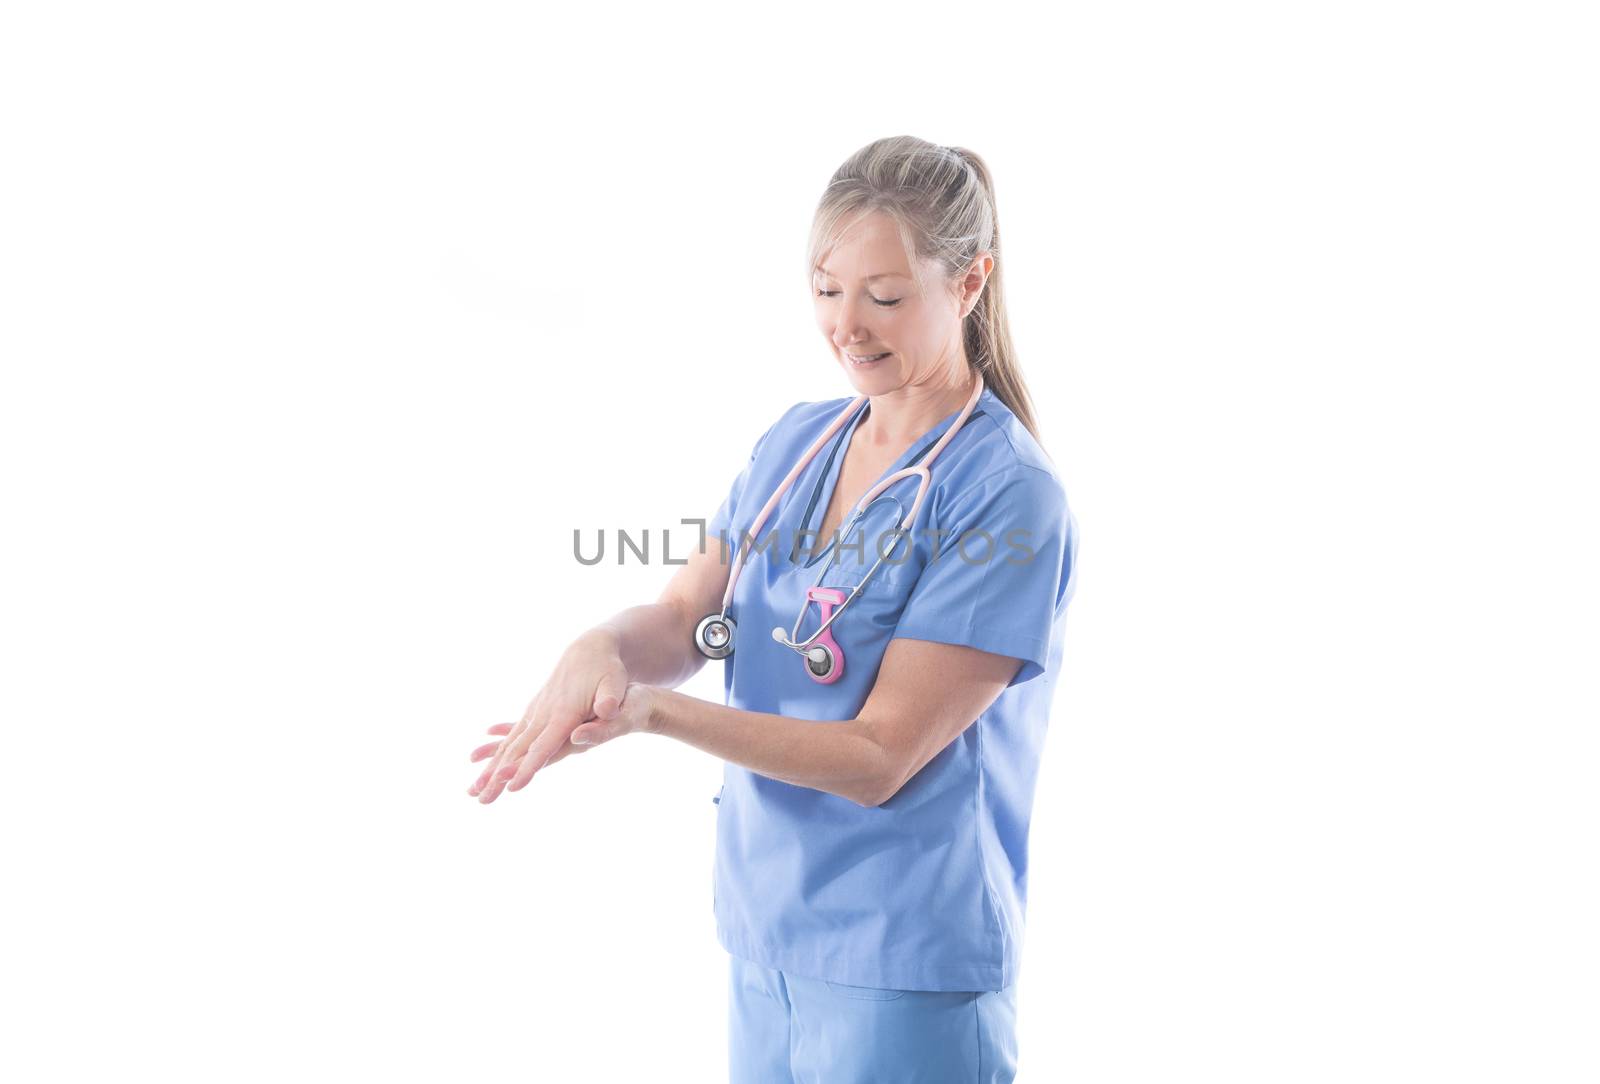 Nurse or doctor washing hands using an alcohol rub.  Hand hygiene before and after a procedure is essential practice